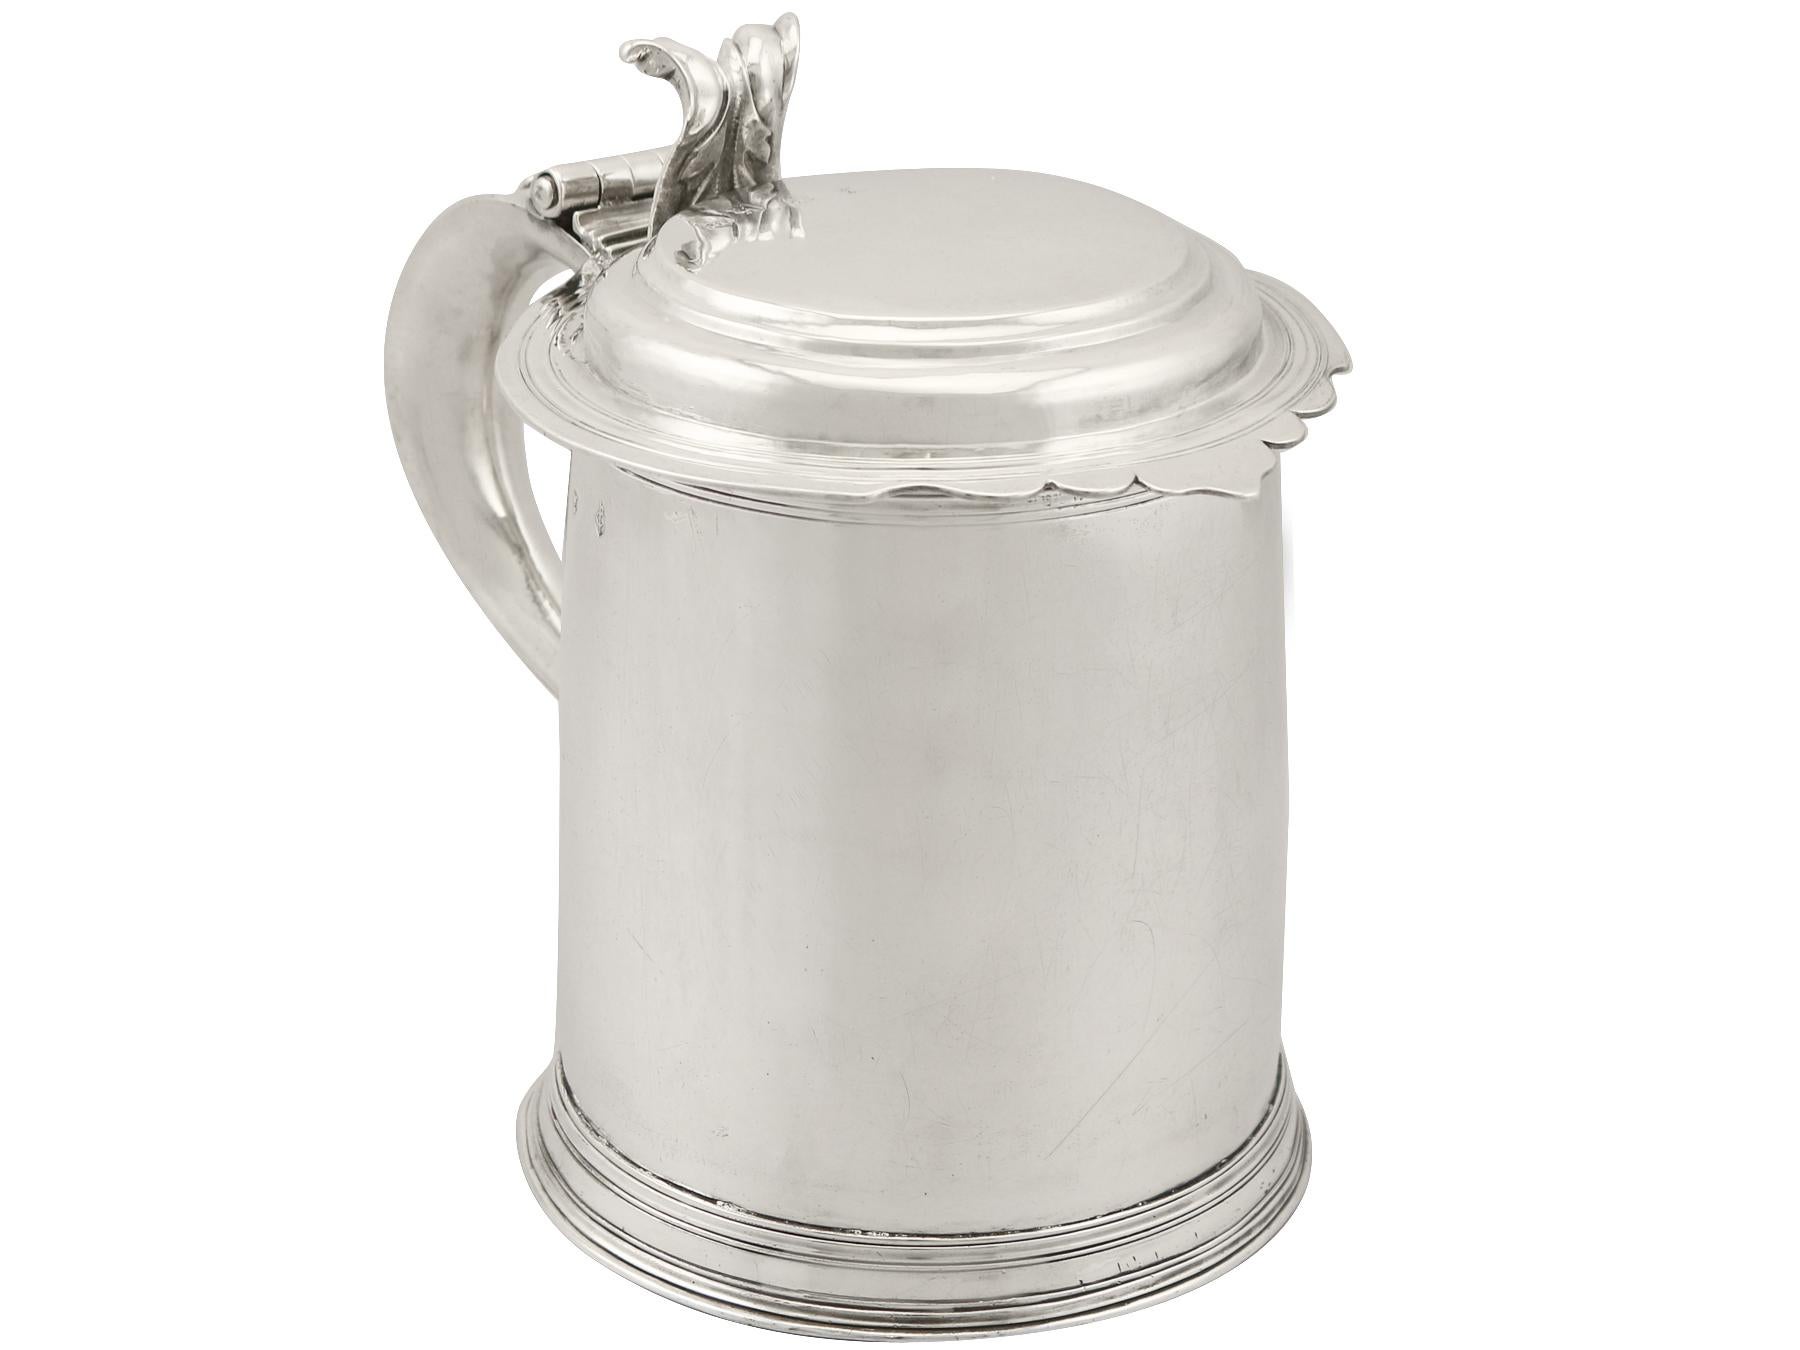 A exceptional, fine and impressive antique William III English Britannia standard silver flat topped quart and a half tankard; an addition to our range of collectible early 18th century silverware.

This exceptional antique William III Britannia